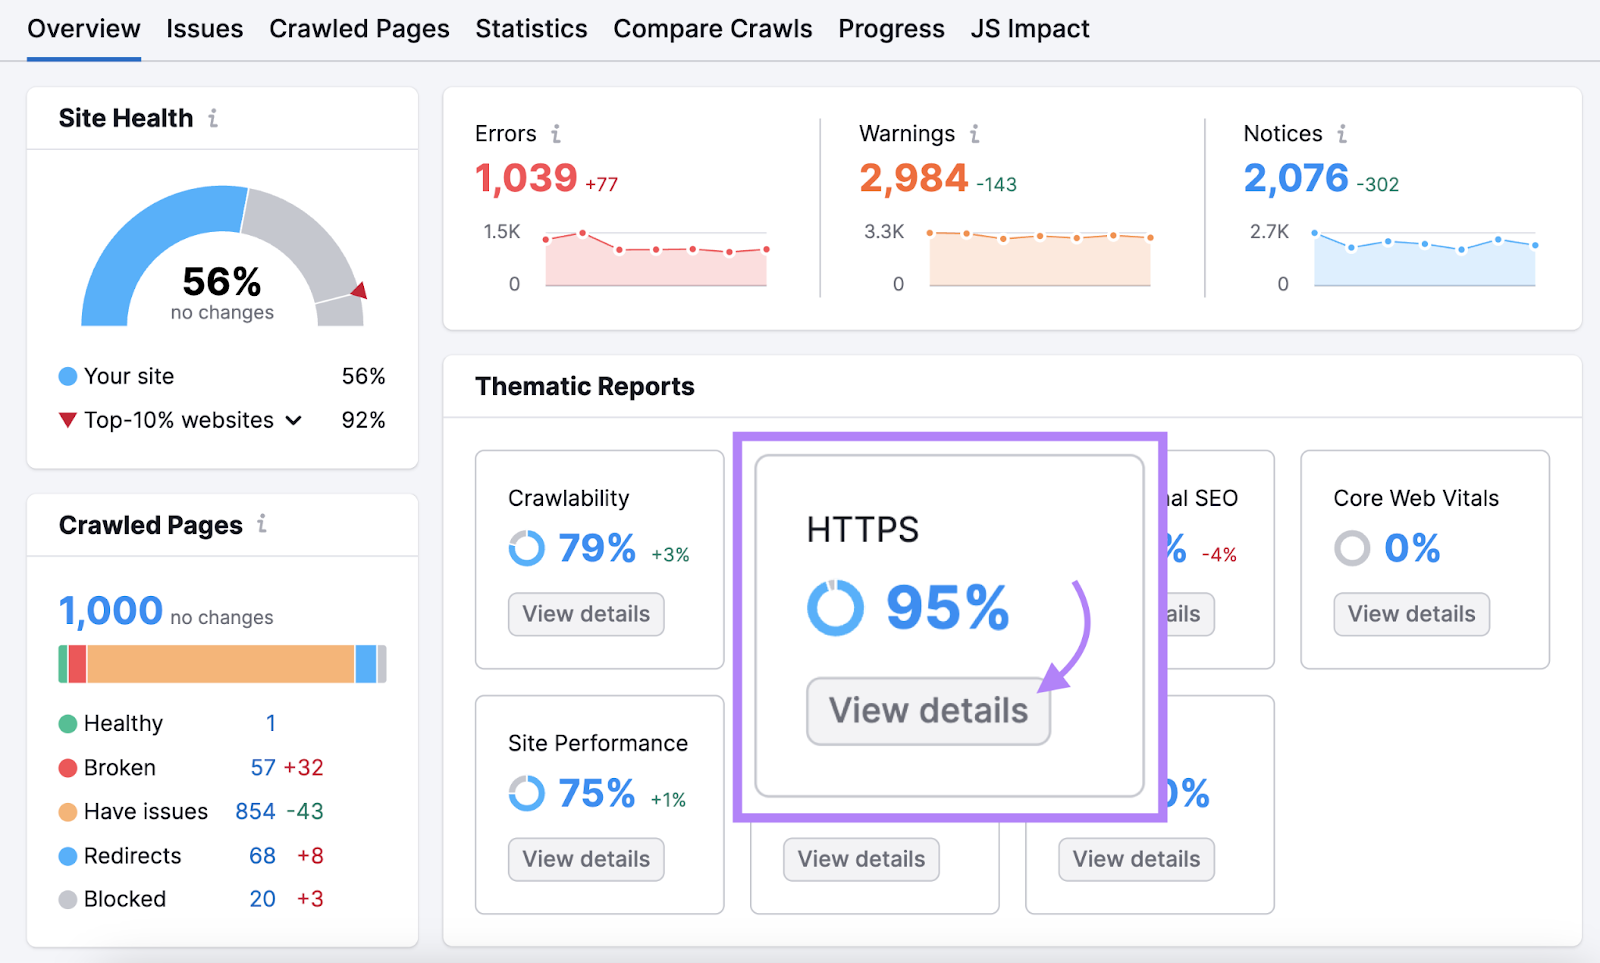 “HTTPS” widget highlighted under "Thematic Reports" section in Site Audit's overview report